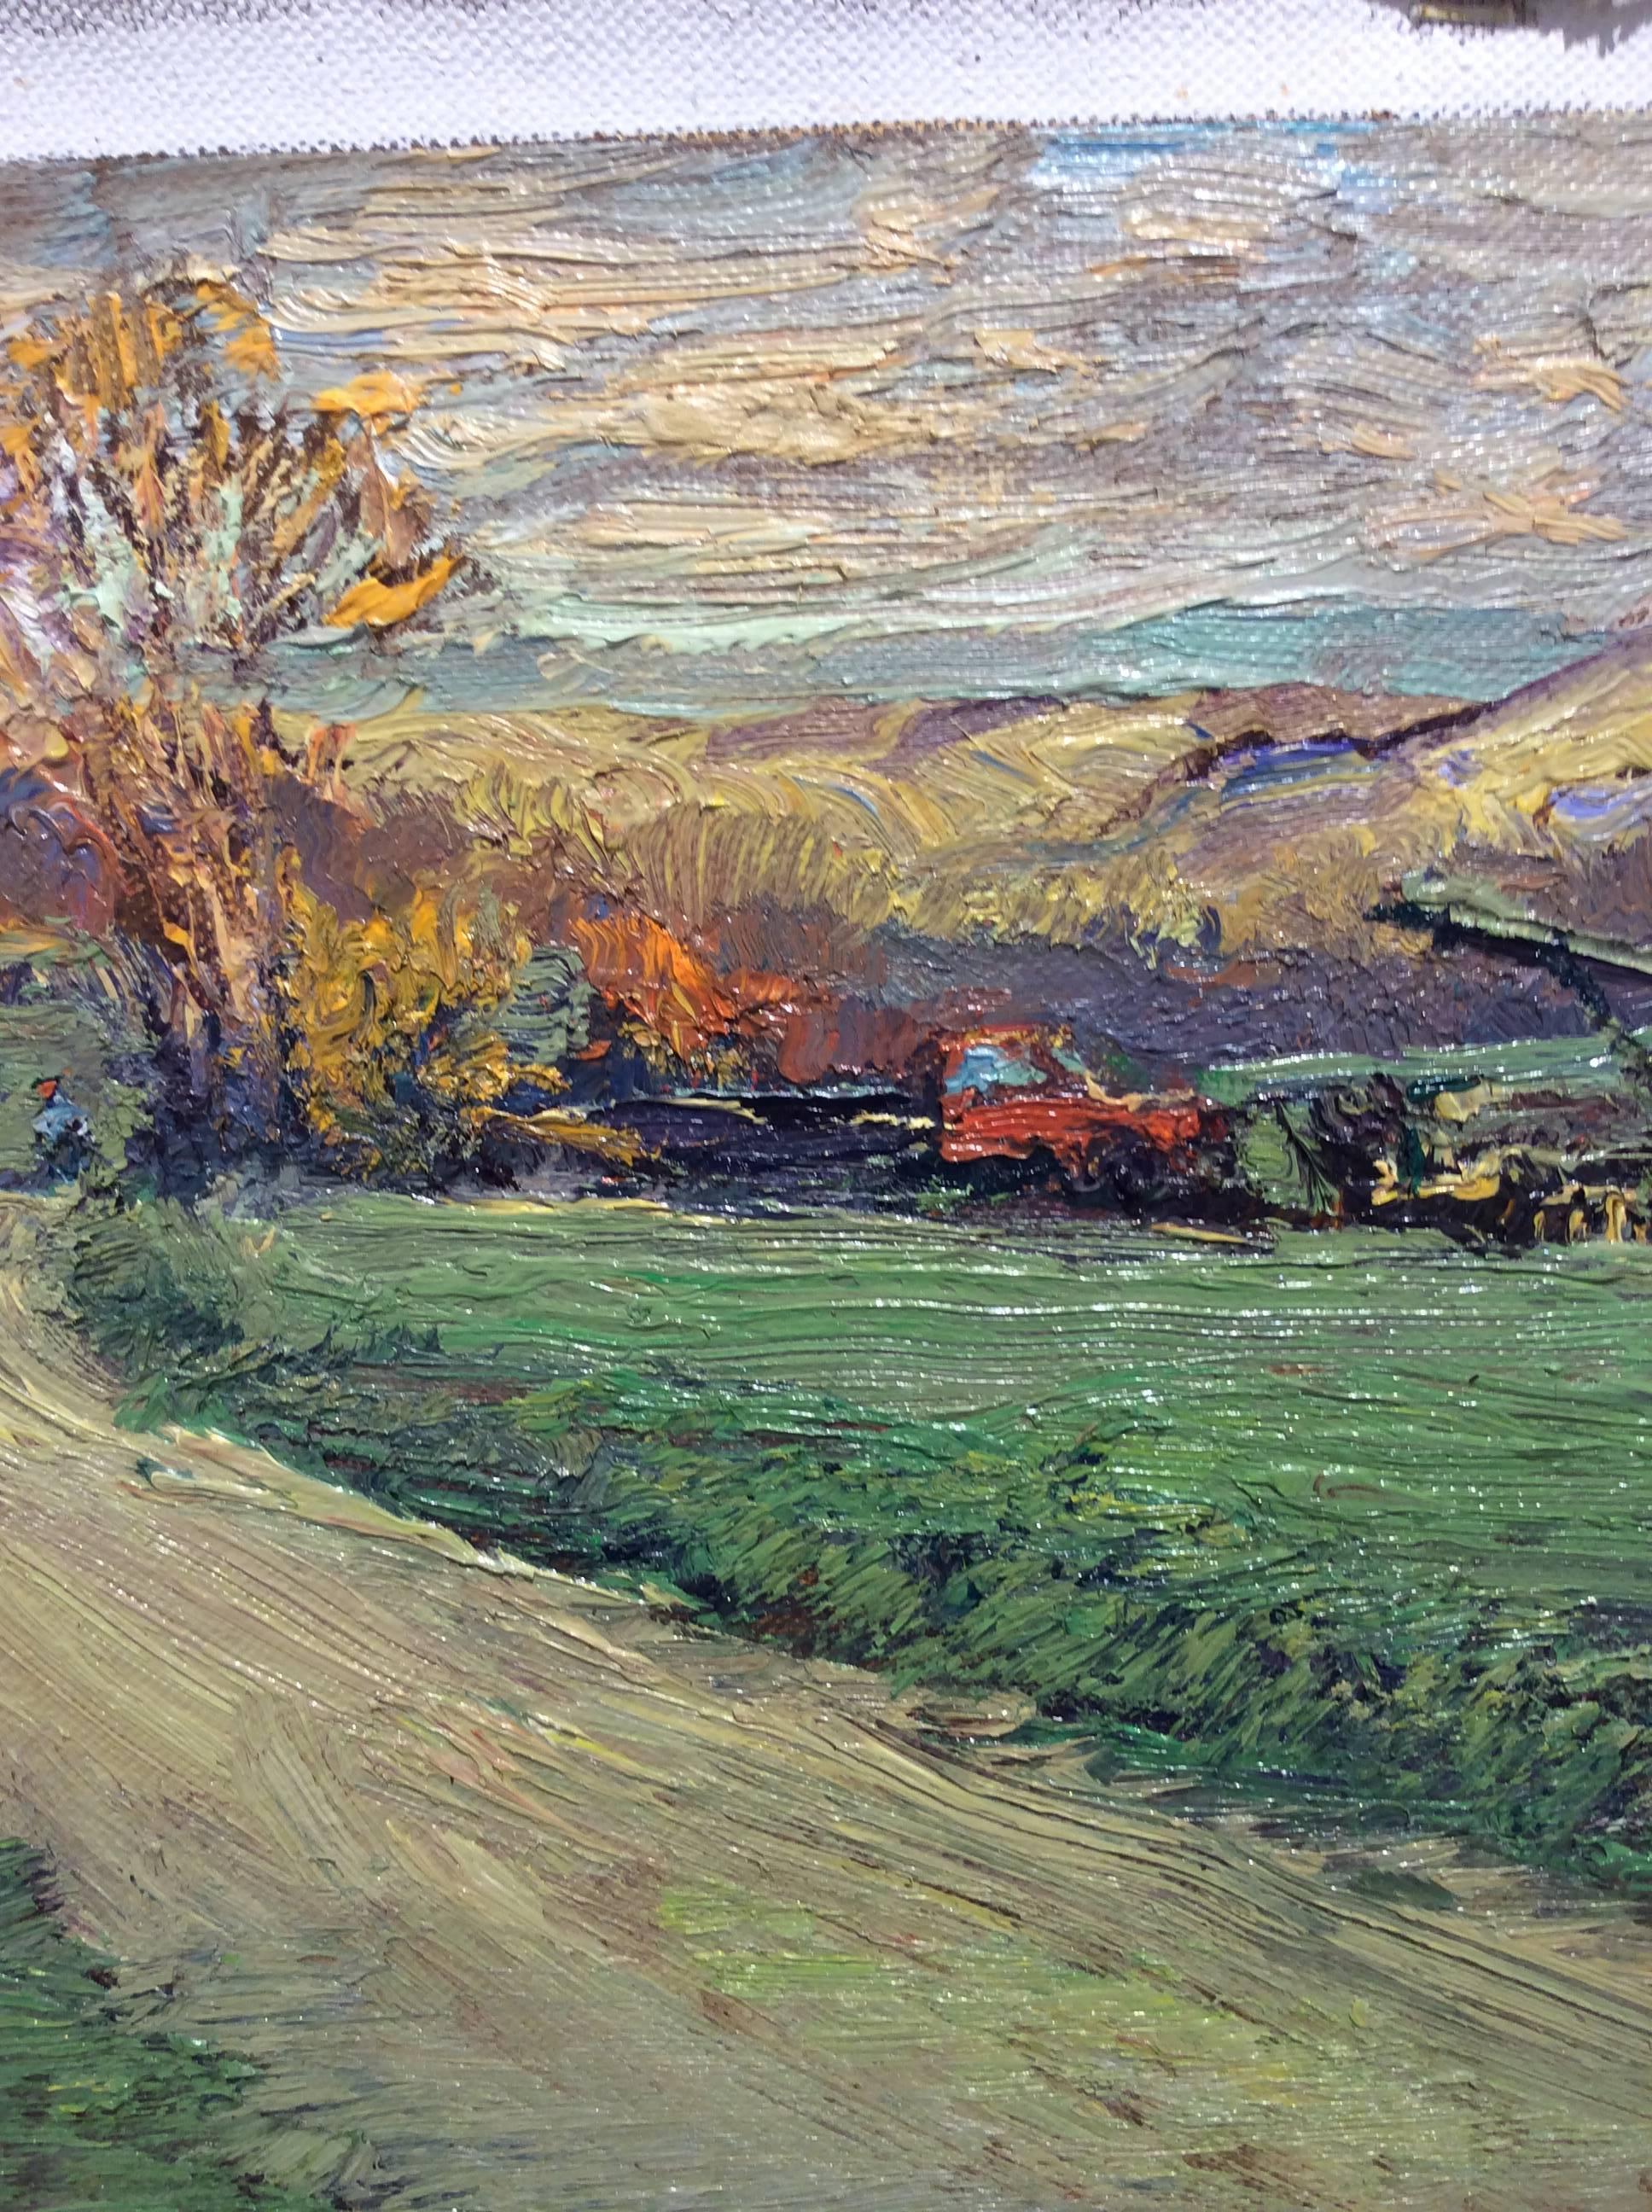 landscape oil painting on linen on homasote board, unframed
12.75 x 18.5 inches

Harry Orlyk is celebrated for his ability to capture an rural country landscape with impressionistic brushstrokes and a bright color palette. Painting daily, the artist